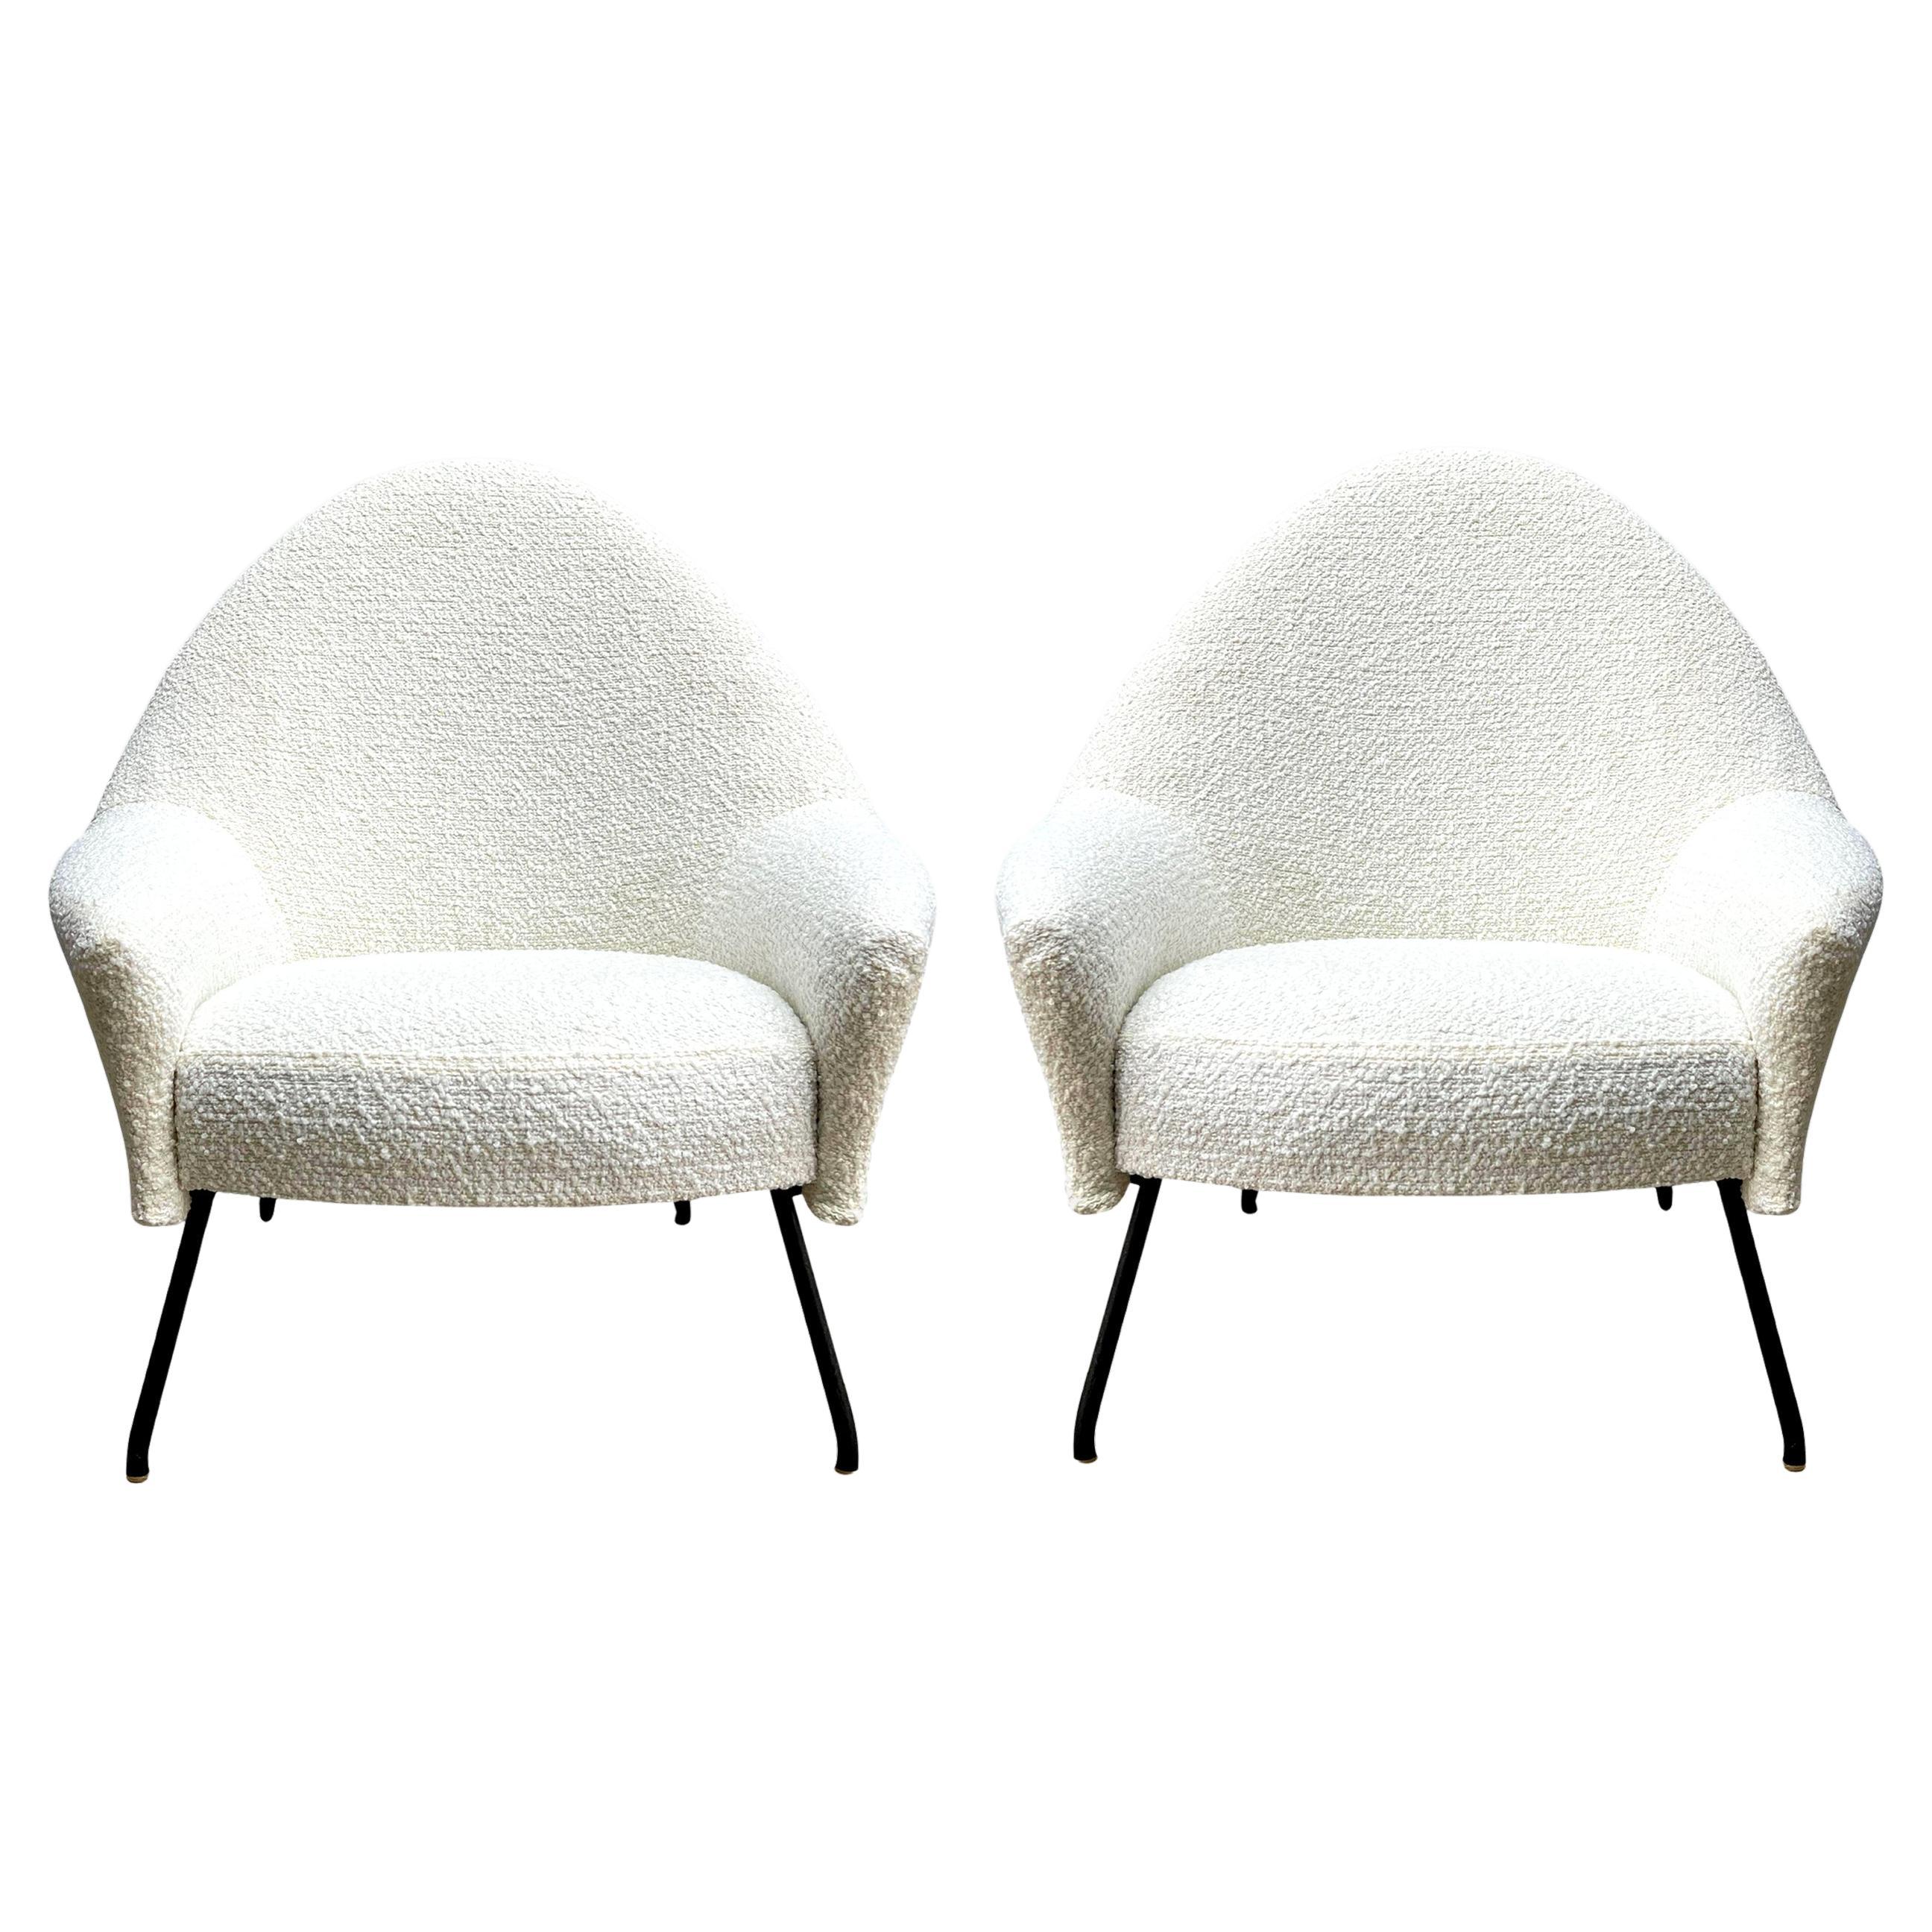 Pair of model 770 armchairs by Joseph-André Motte Ed. Steiner, France circa 1958 For Sale